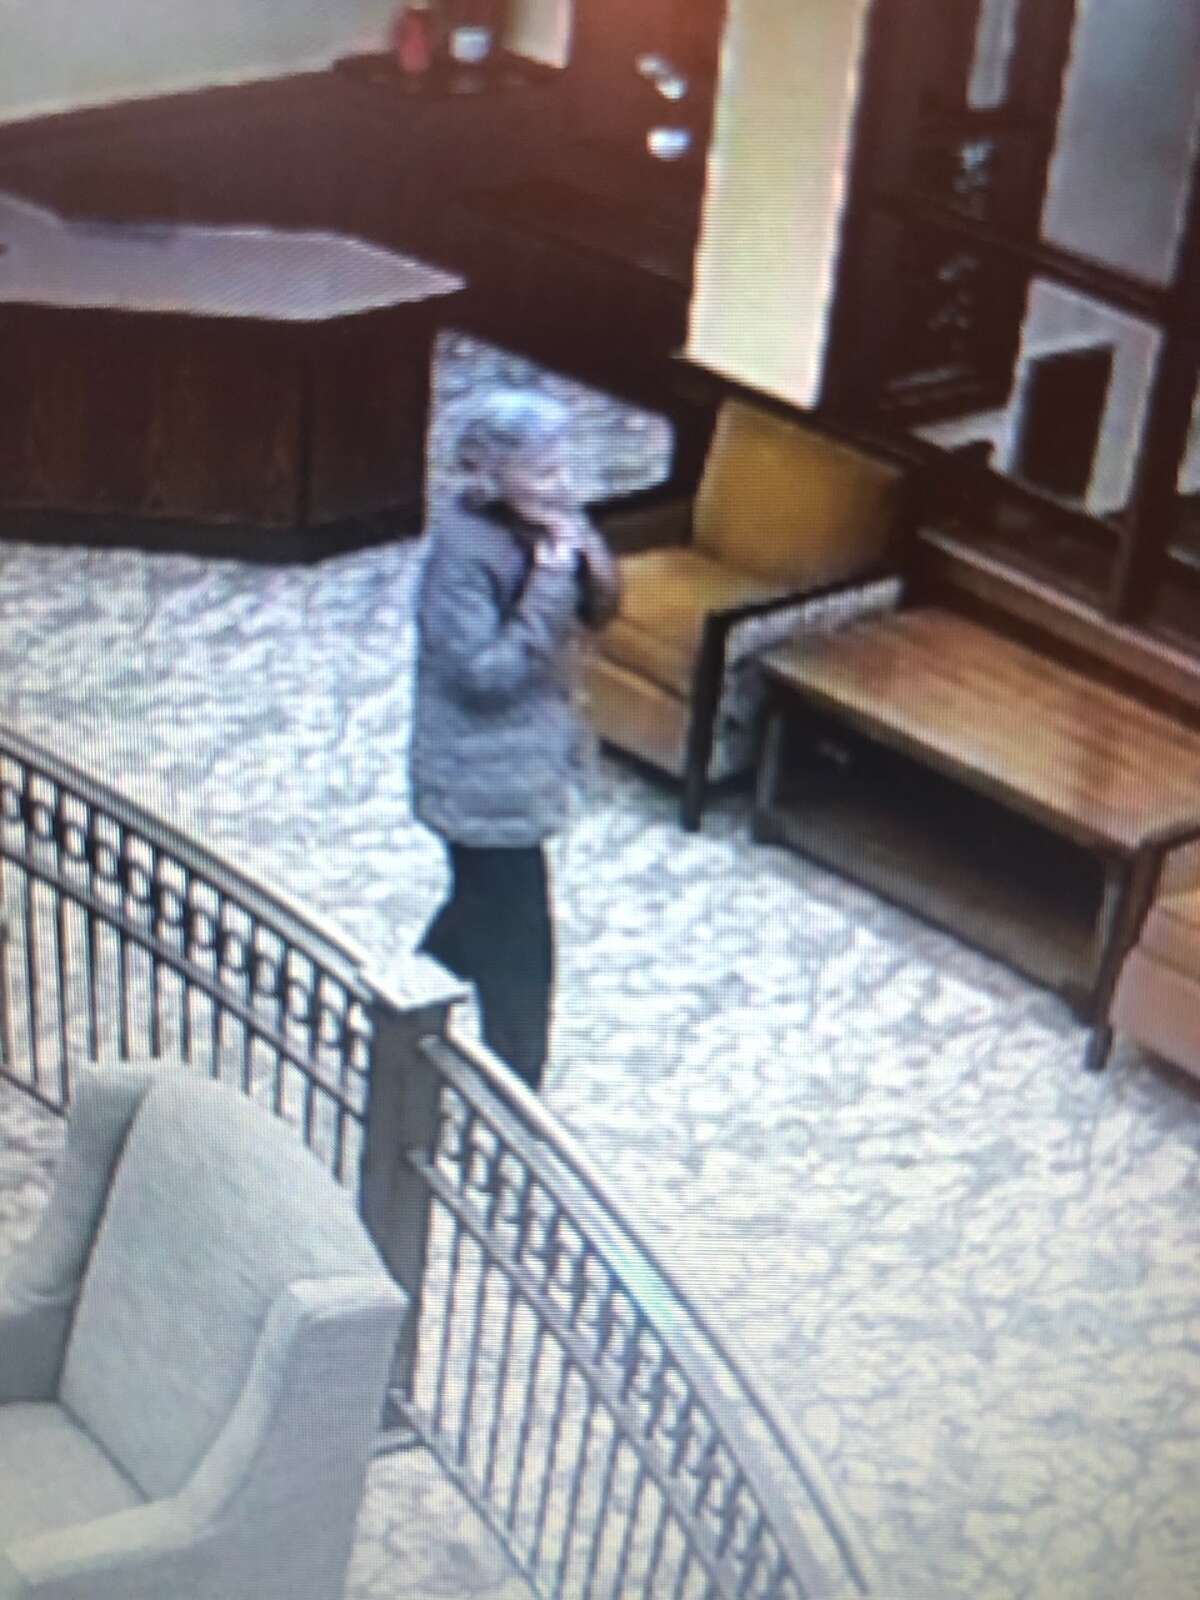 Midland Police Department is searching for an 80-year-old woman who went missing this morning from Primrose Retirement Community. Marilyn Goeders is a caucasian woman with shoulder length gray hair. She was last seen wearing a light brown winter coat, glasses and black pants. Goeders, who has dementia, is believed to have walked away from the facility. 